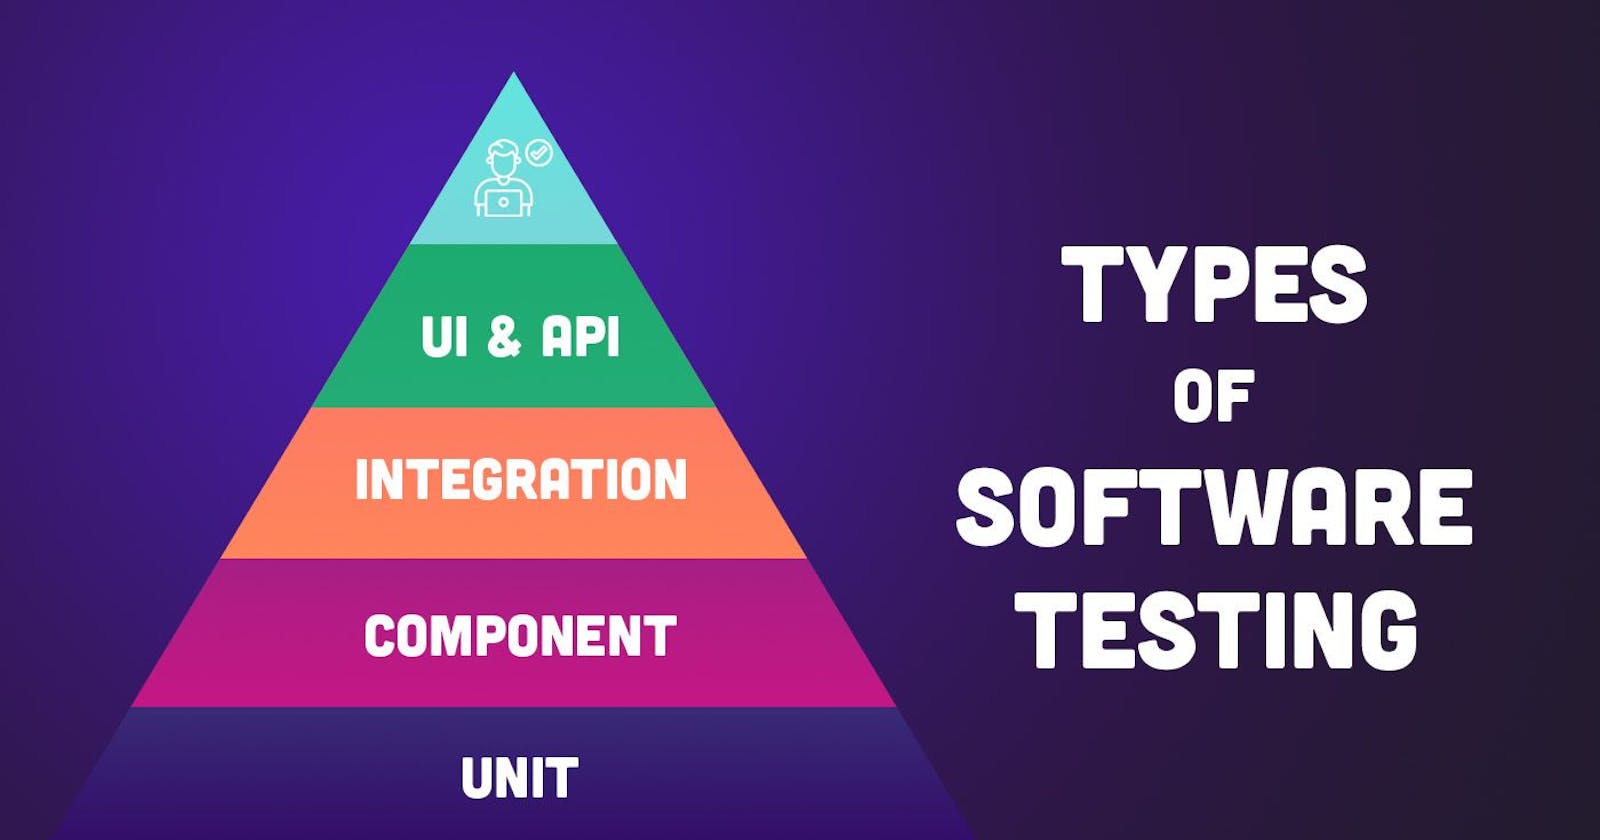 What are the different types of software testing?